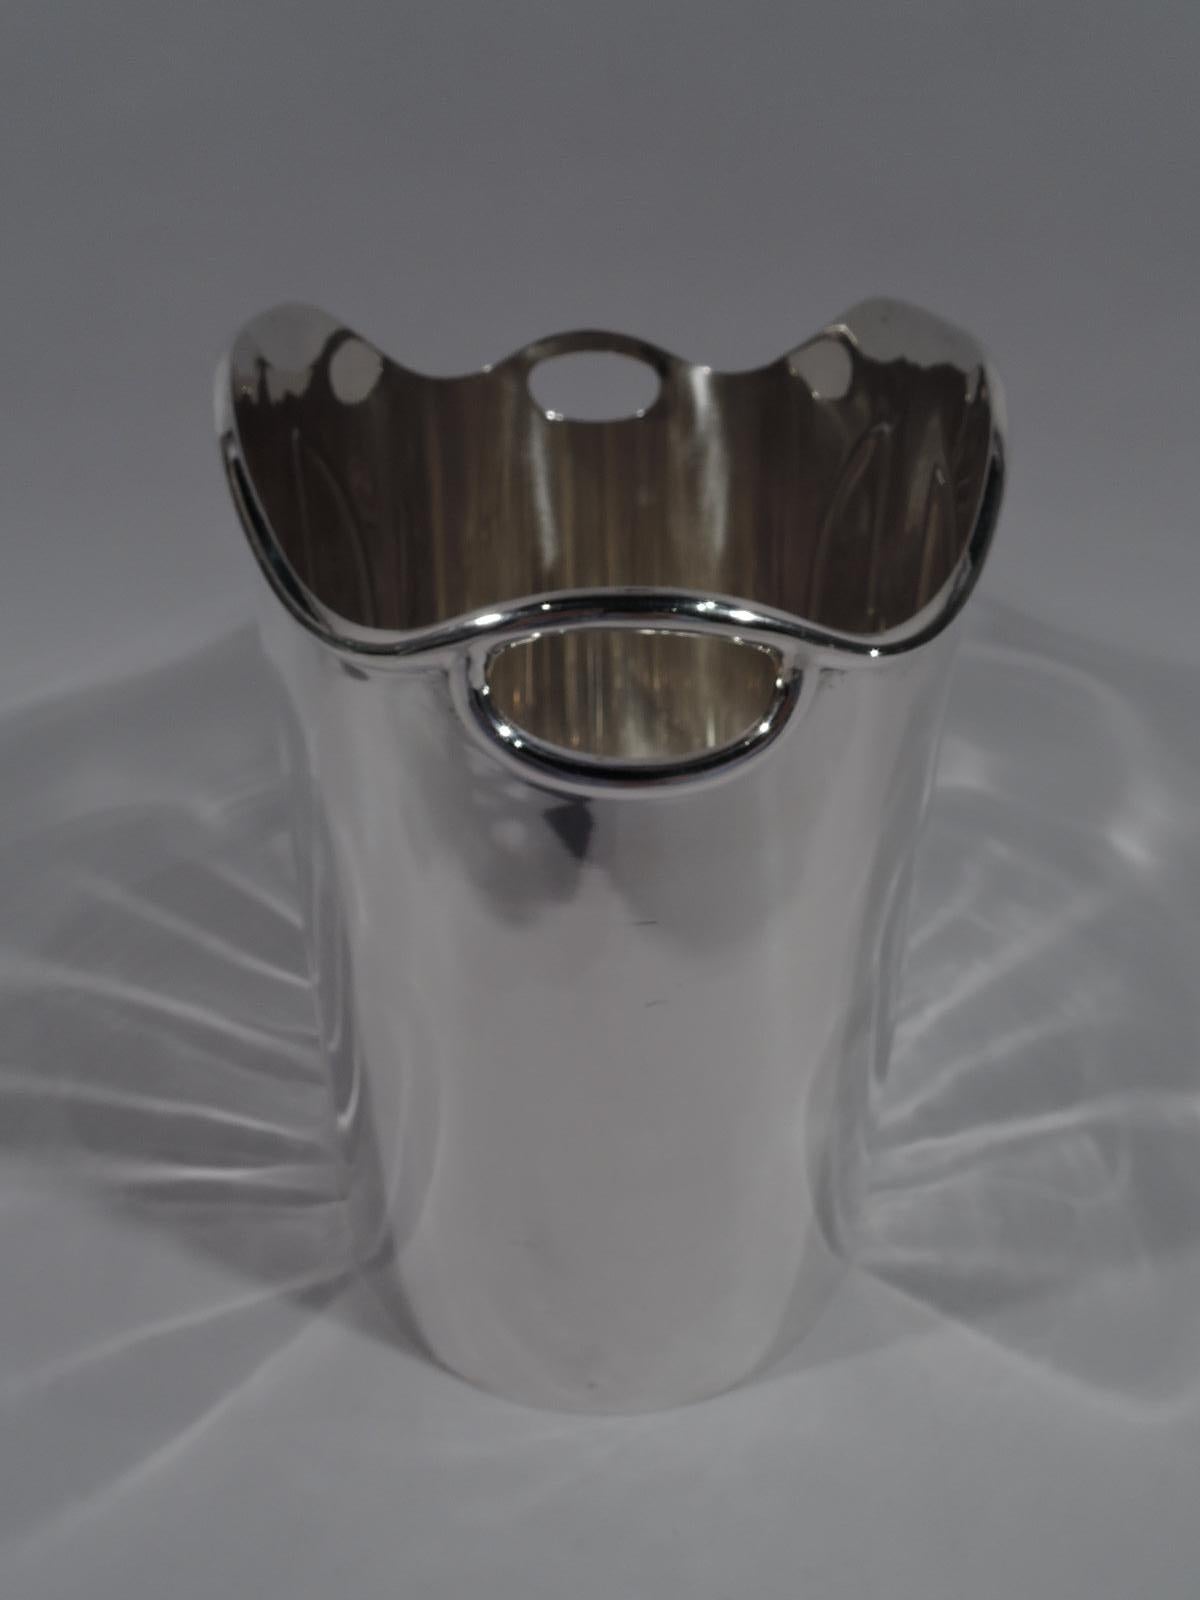 Super stylish sterling silver wine cooler. Retailed by Cartier in New York. Oval with straight sides, and molded and arched rim. Front and back have embossed vertical geometric ornament. Cutout oval side handles. Post-1967 Italian hallmark with